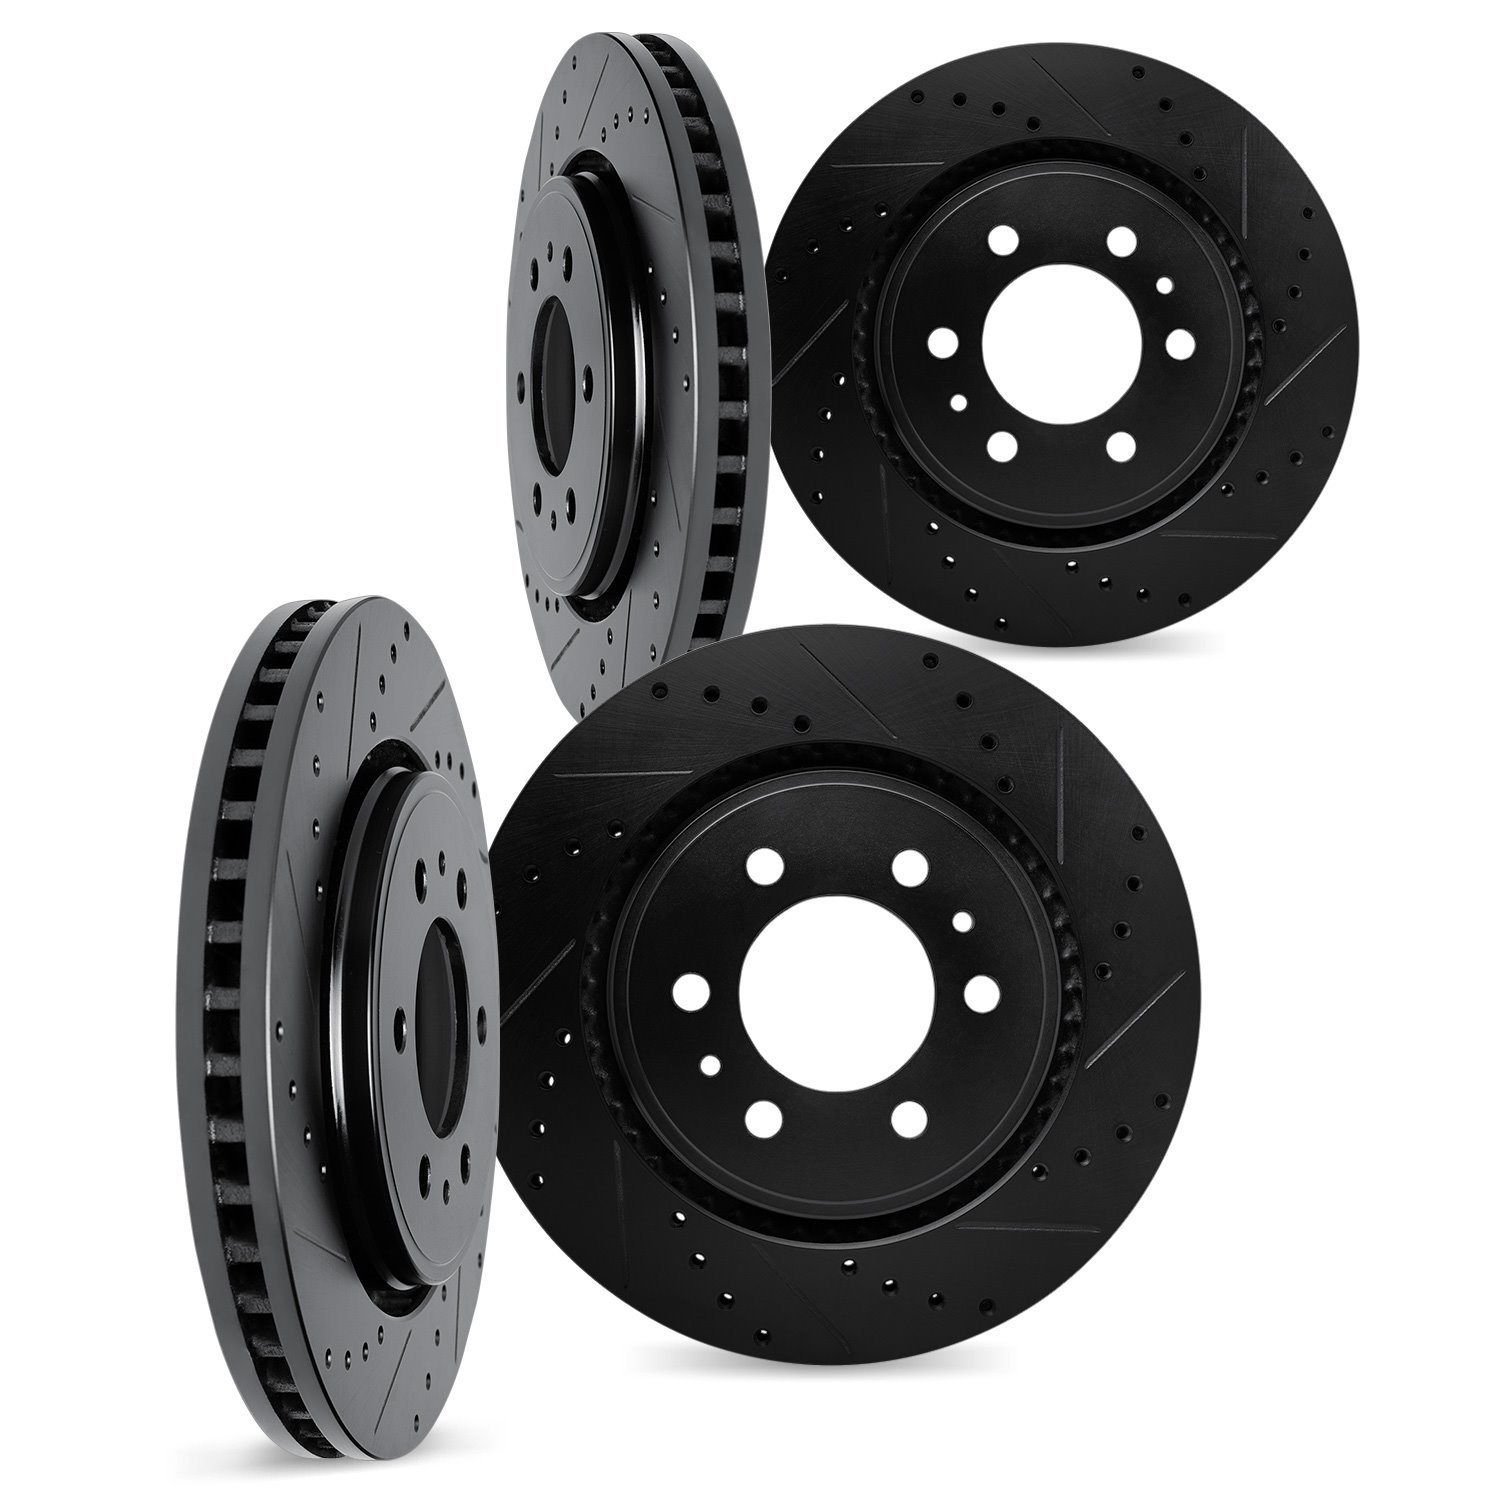 8004-40155 Drilled/Slotted Brake Rotors [Black], Fits Select Multiple Makes/Models, Position: Front and Rear